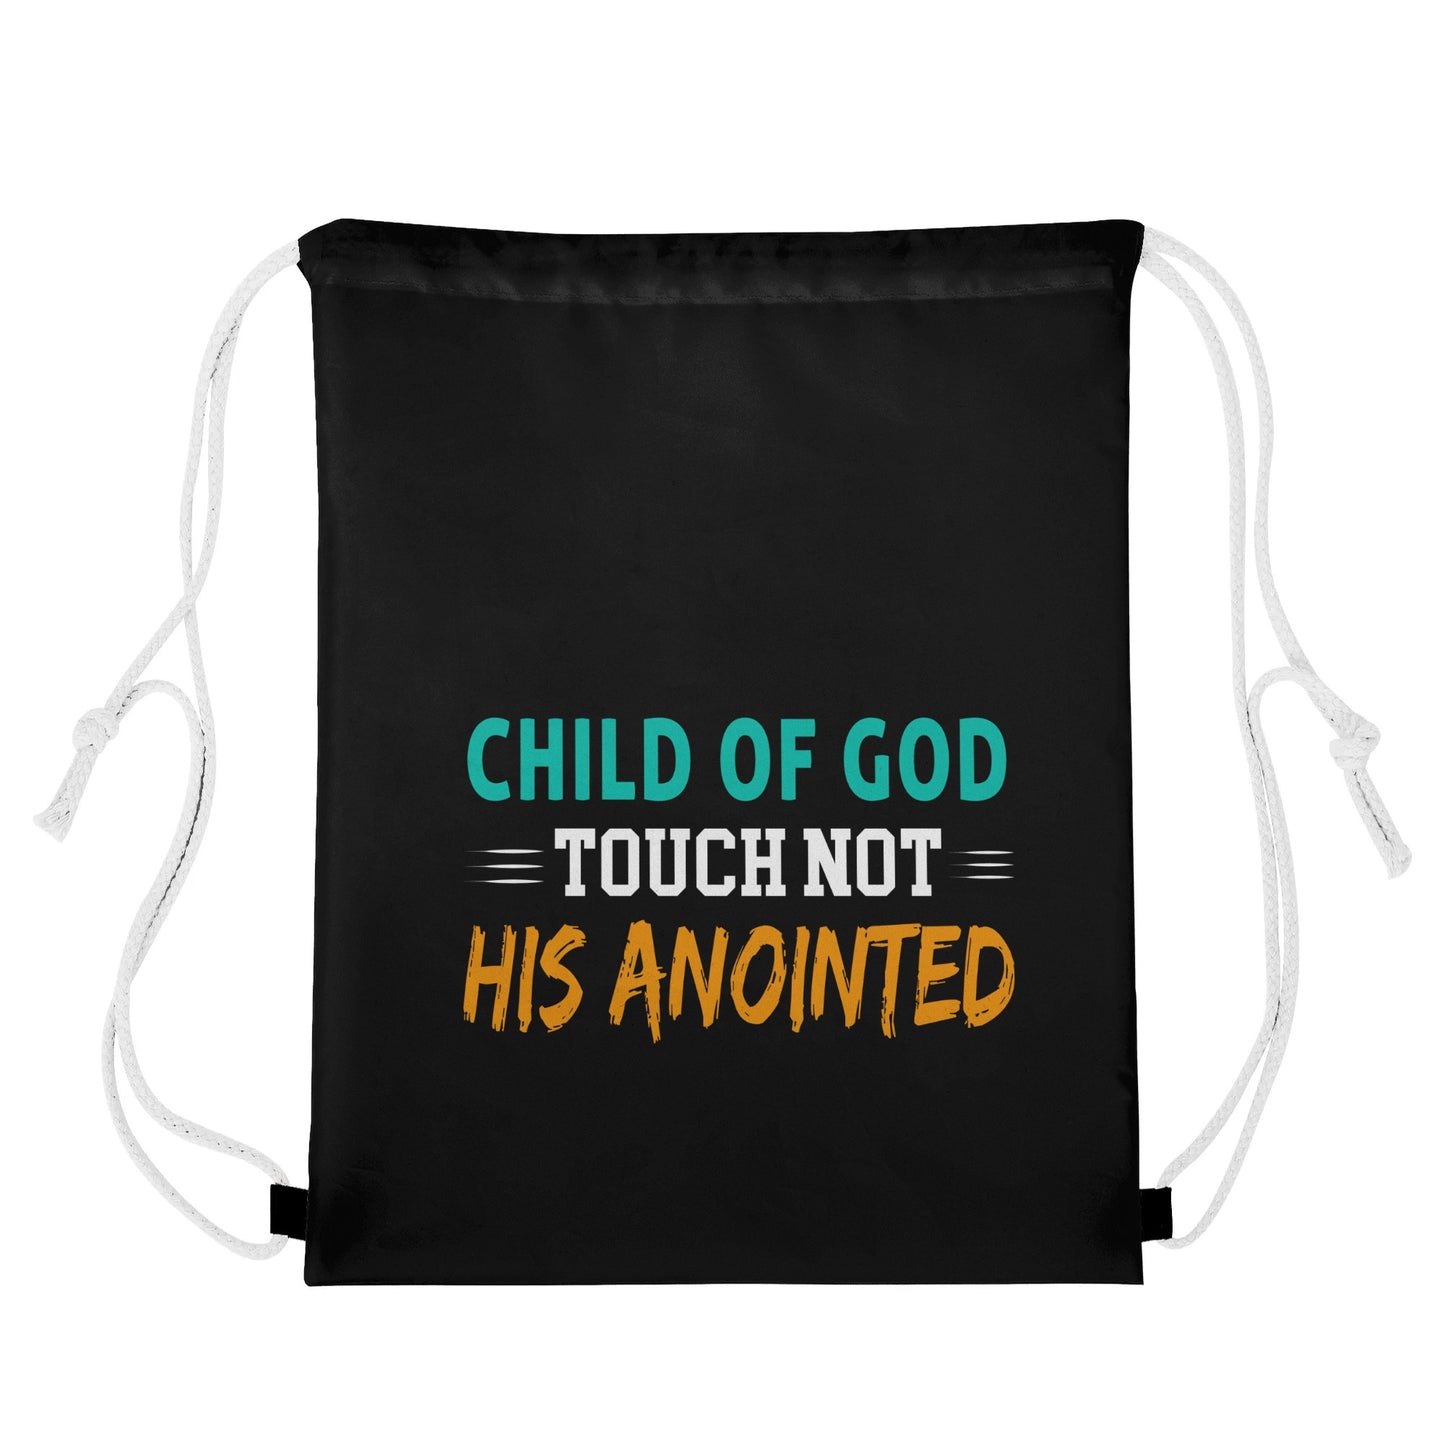 Child Of God Touch Not His Anointed Gym Drawstring Bag popcustoms